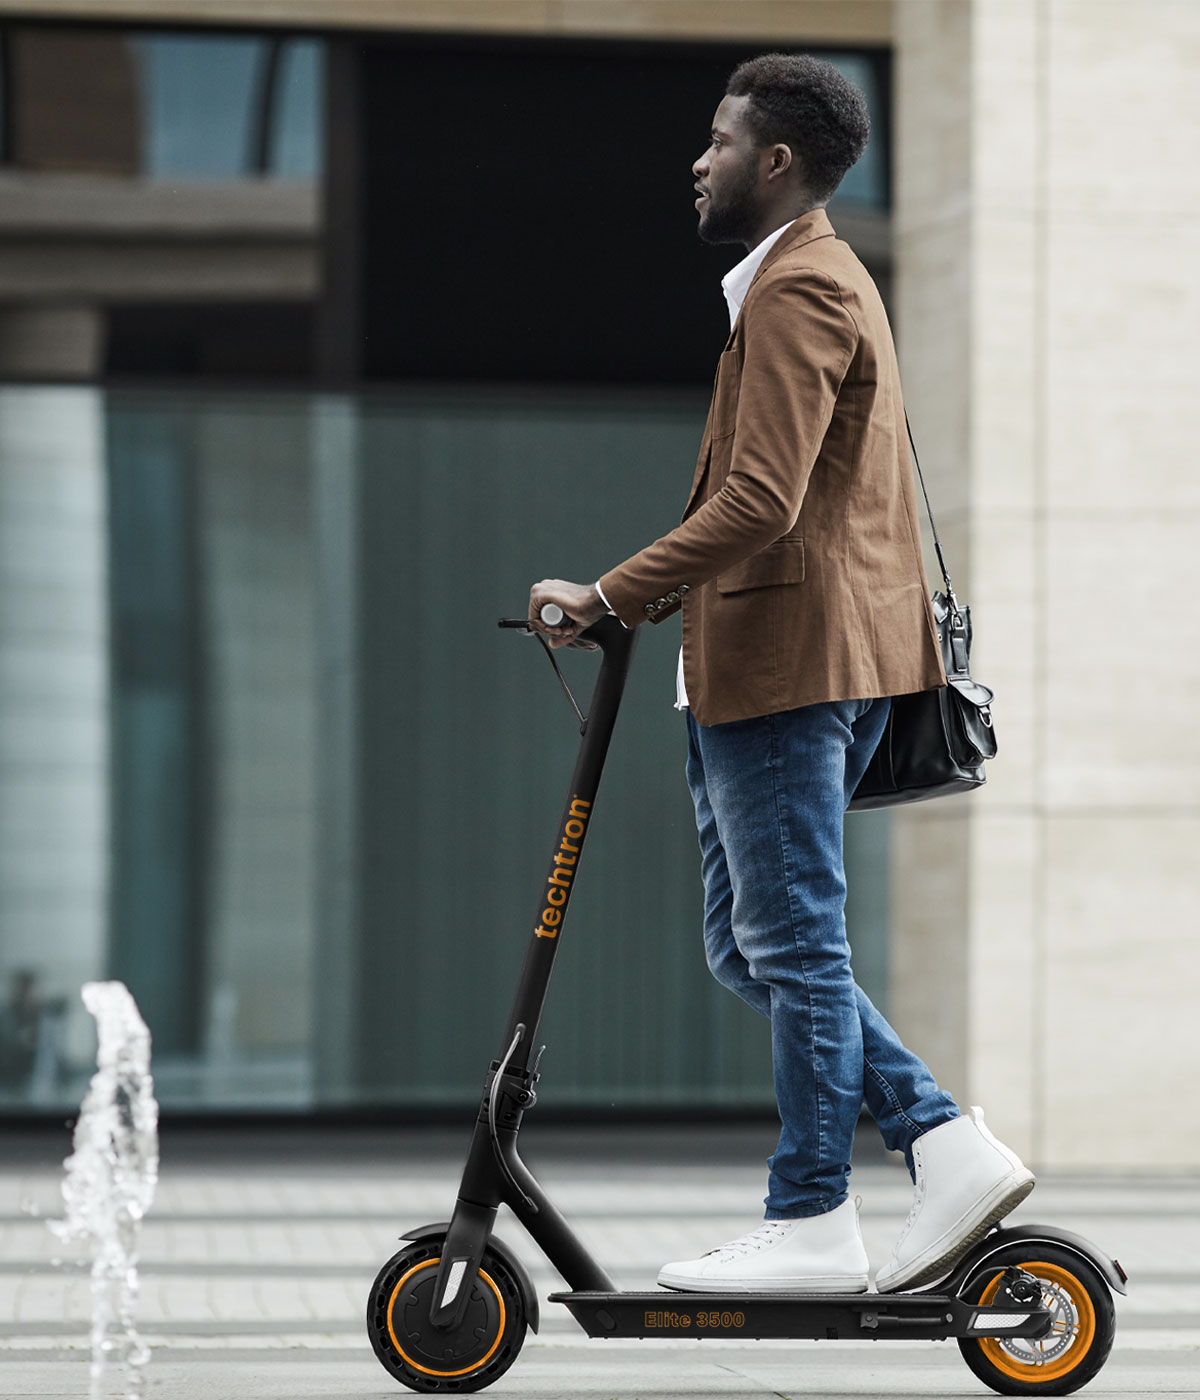 techtron Pro 3500 electric scooter